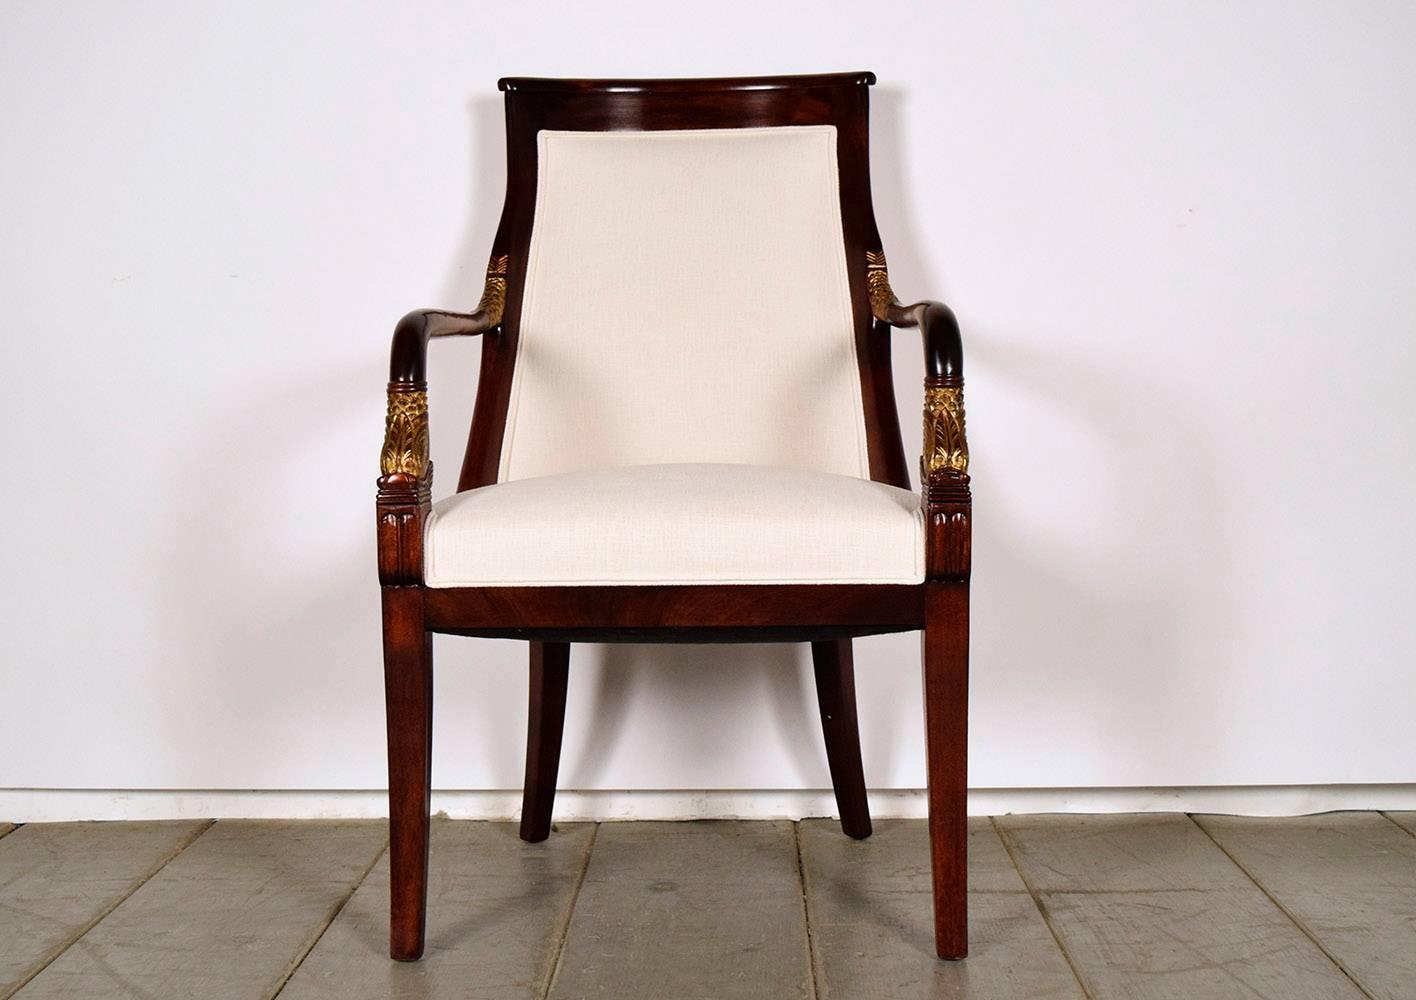 This set of eight Empire-style dining chairs feature frames made from mahogany wood that has been stained in a deep and rich color stain. The frames feature a curved back that leads into beautiful carved arms with gilded leaf motif accents. The